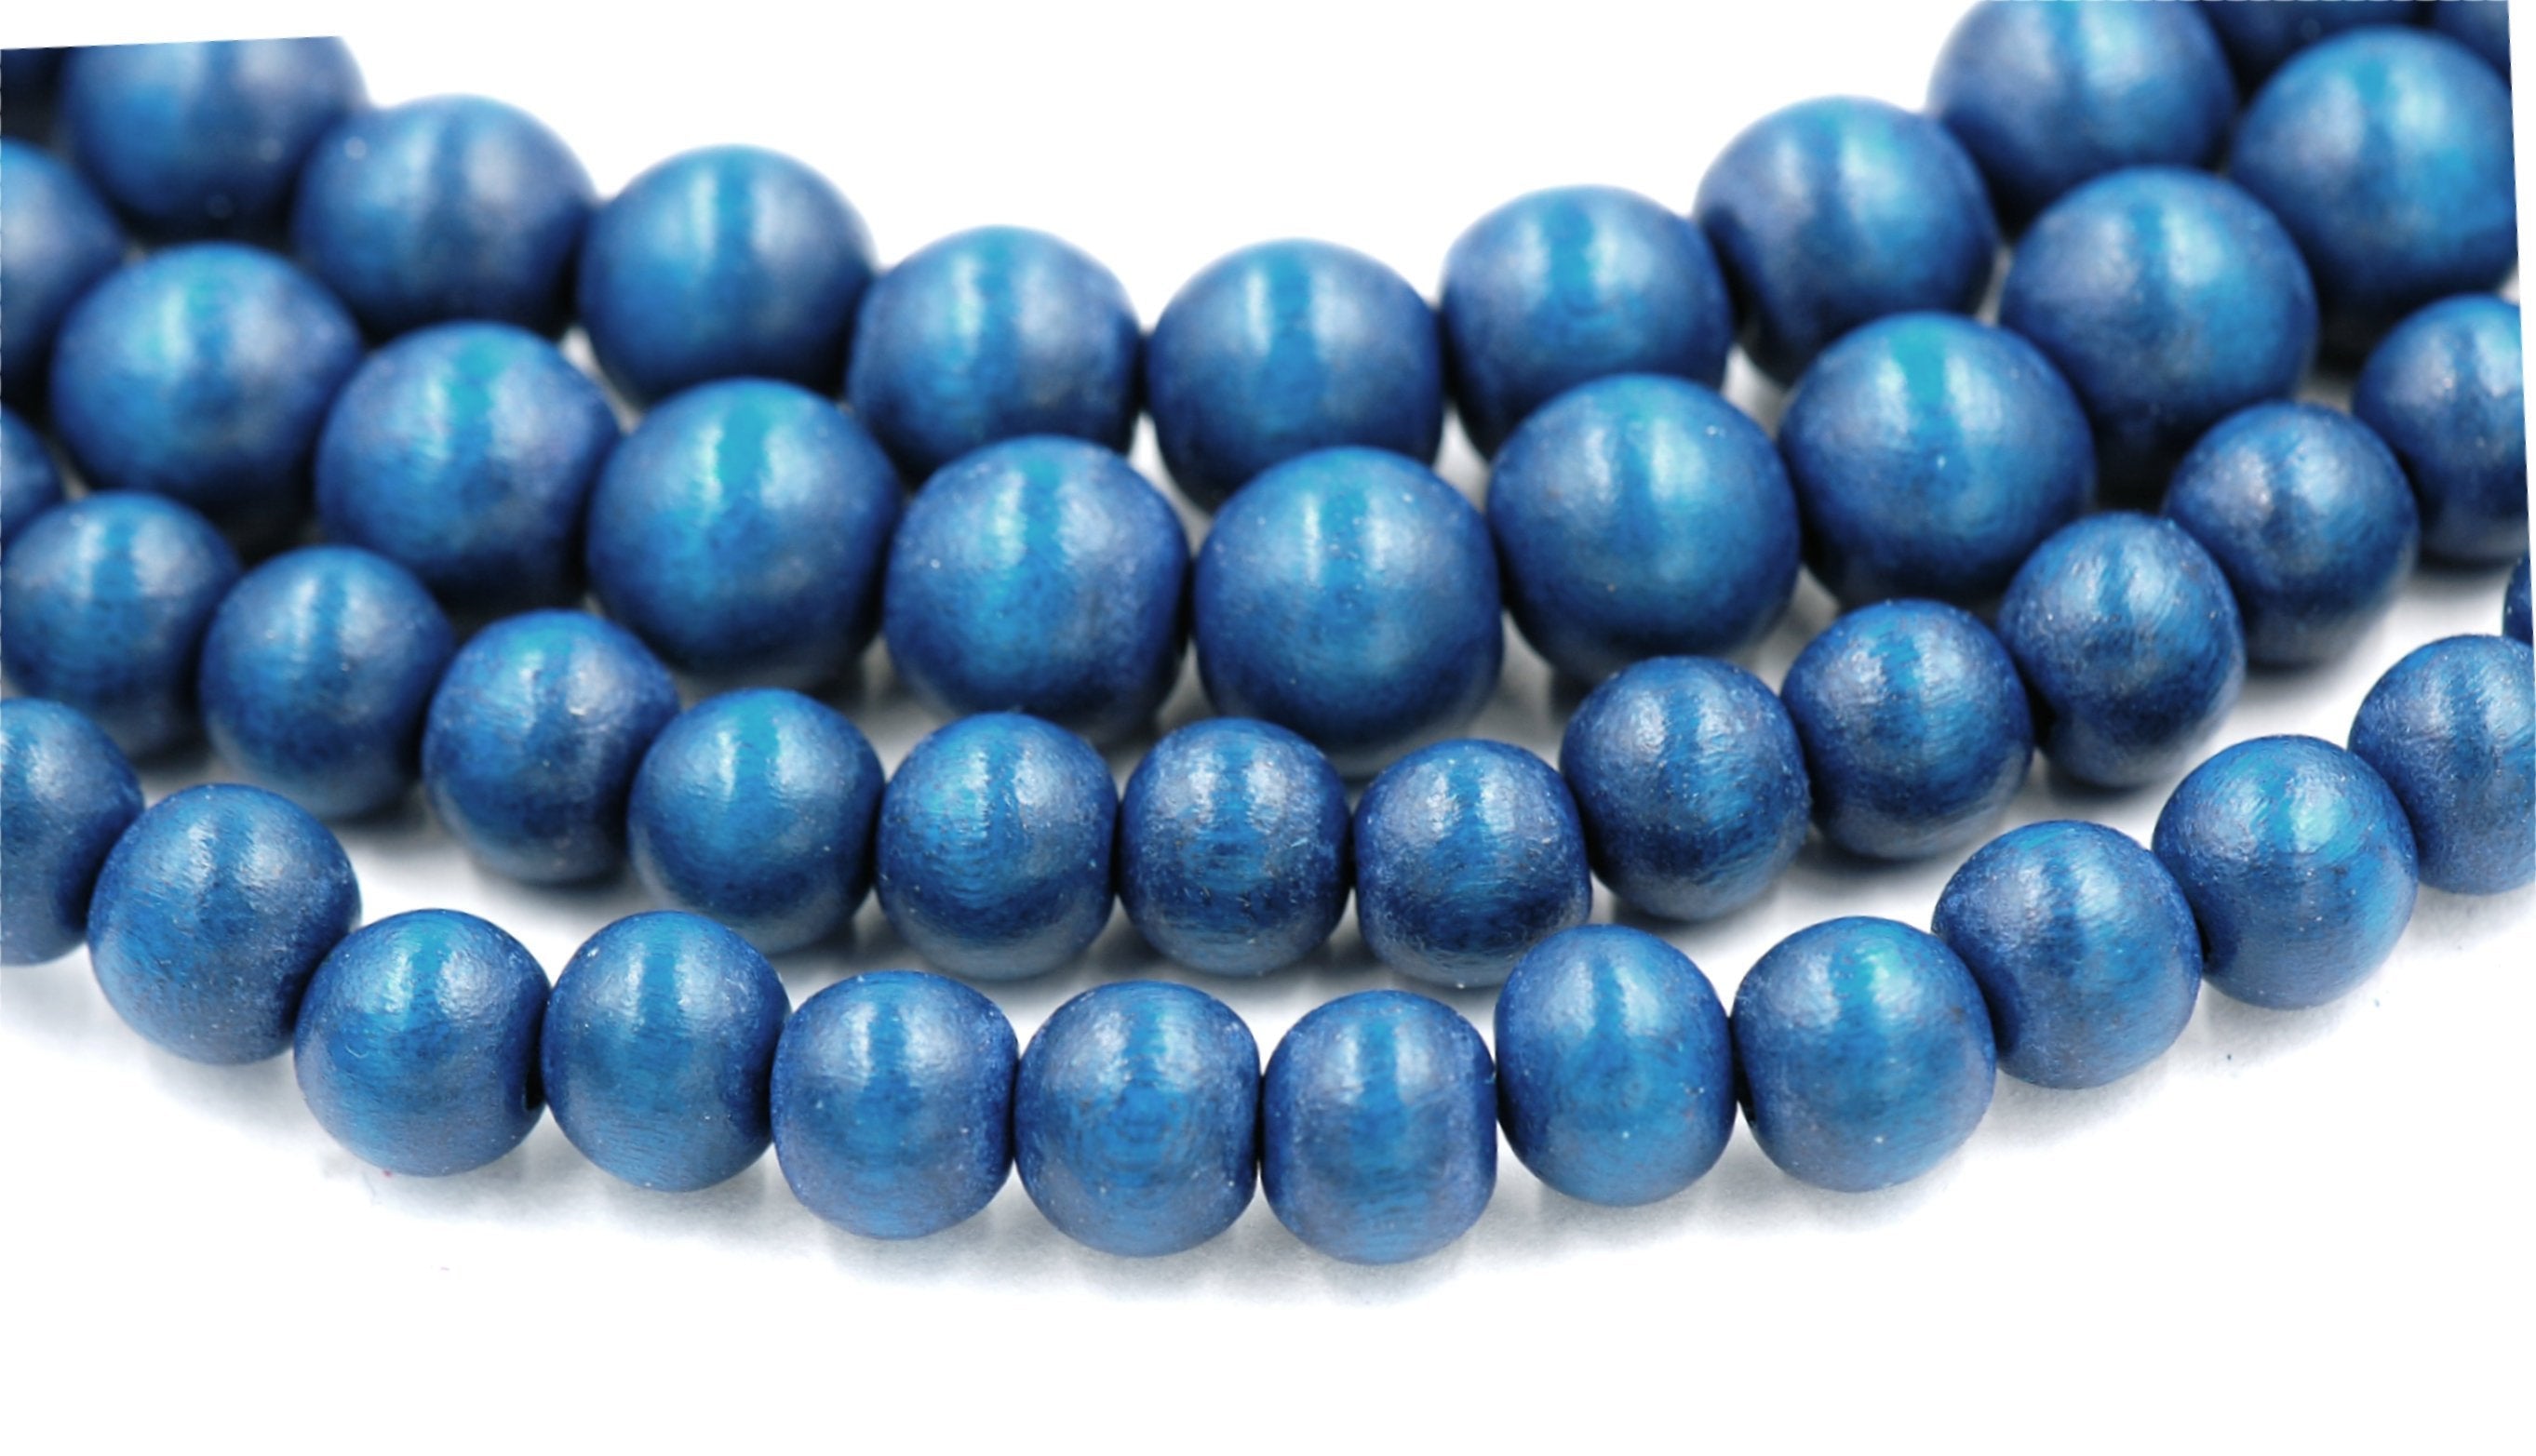 Blueberry Blue Beads 6mm 8mm 10mm Wood beads -16 inch strand